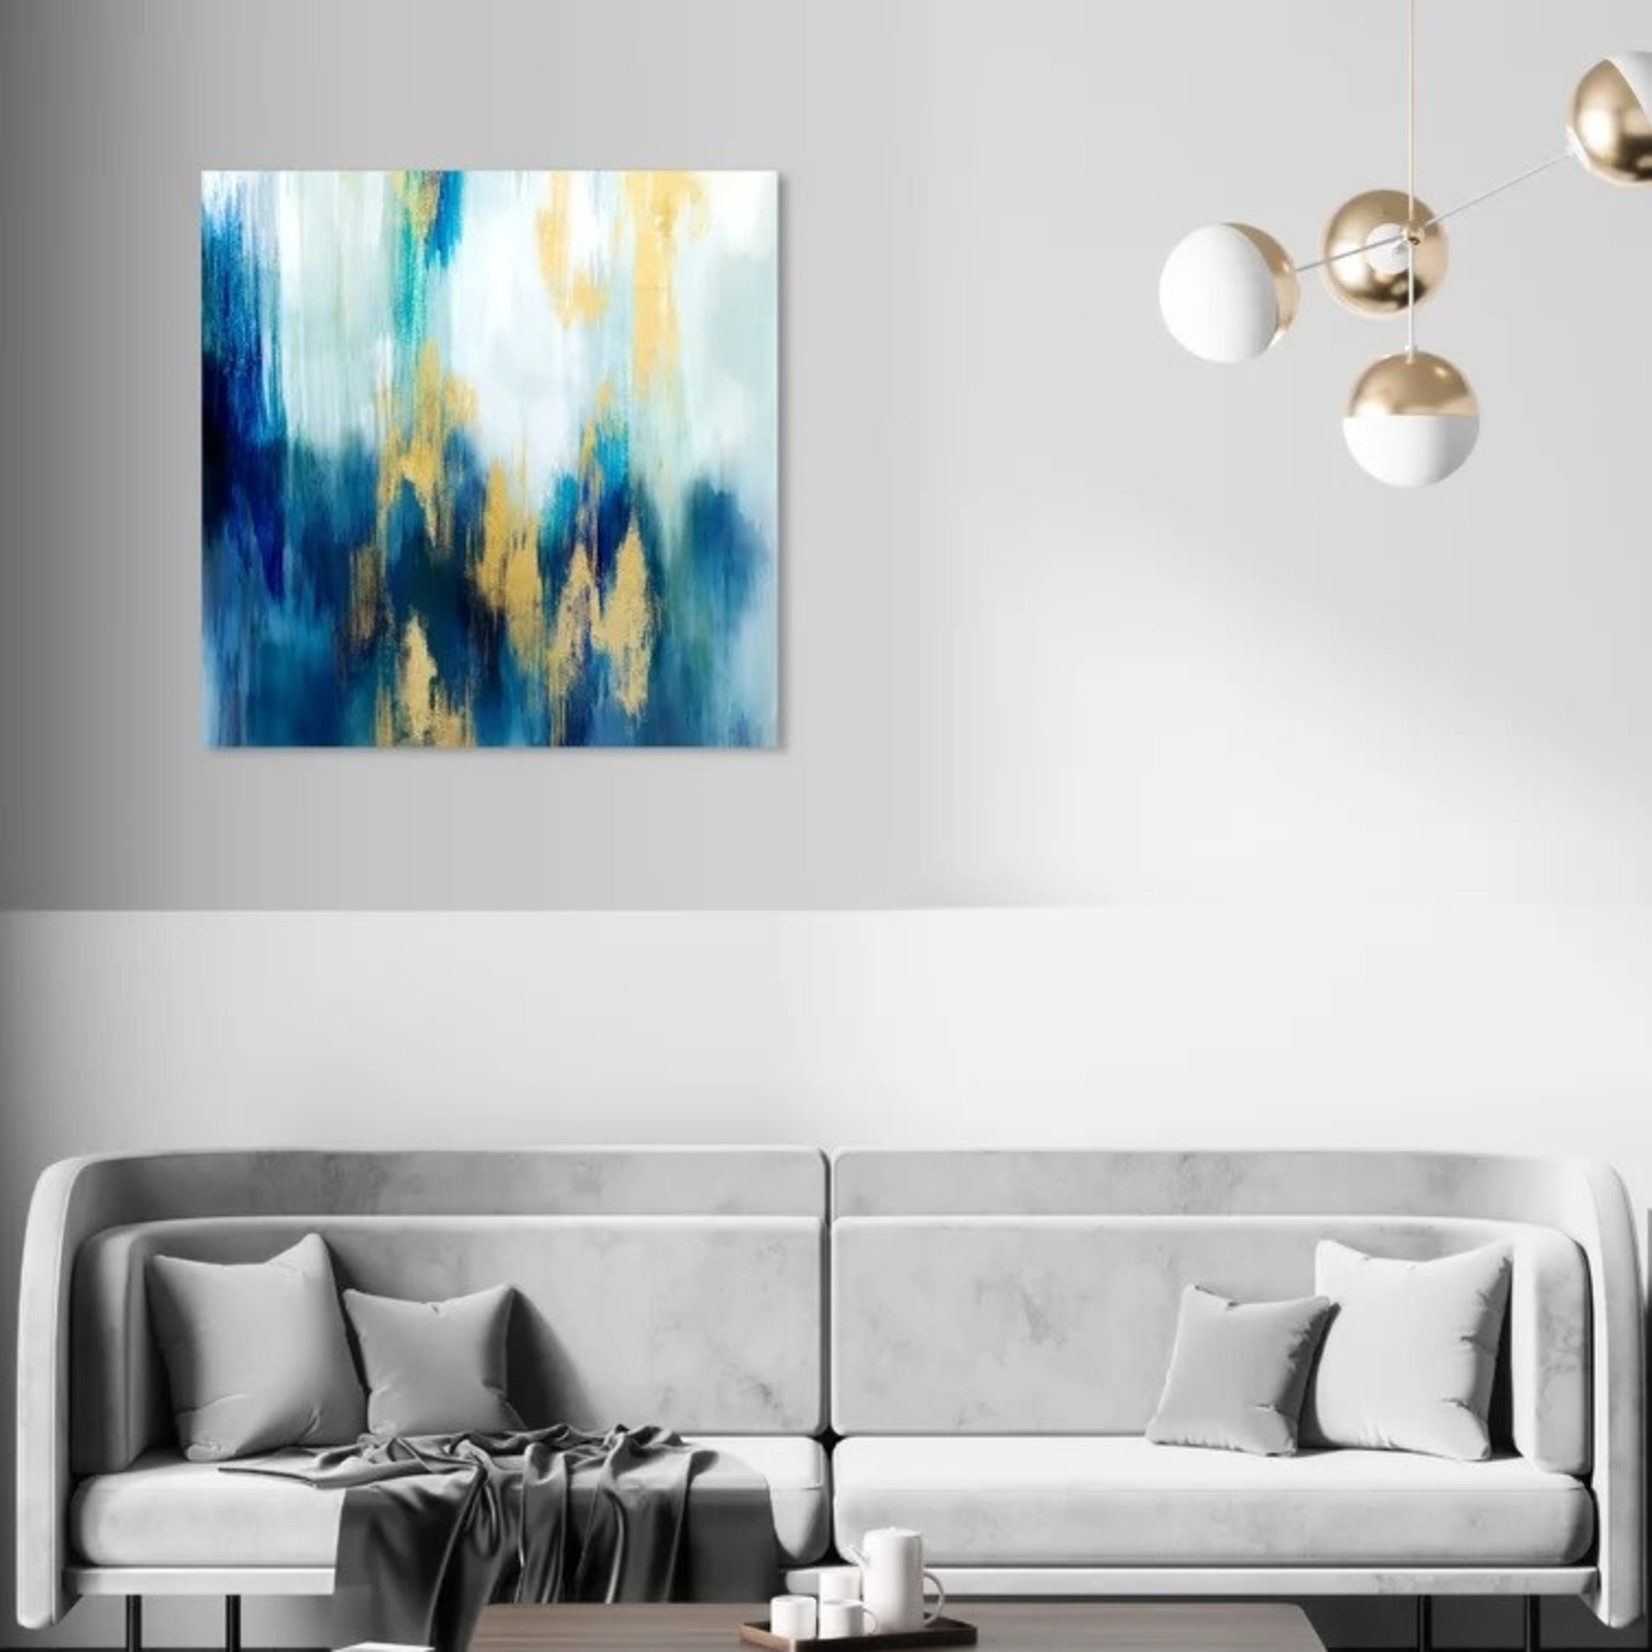 *30"x30"Abstract Rainy Gold - Painting Print